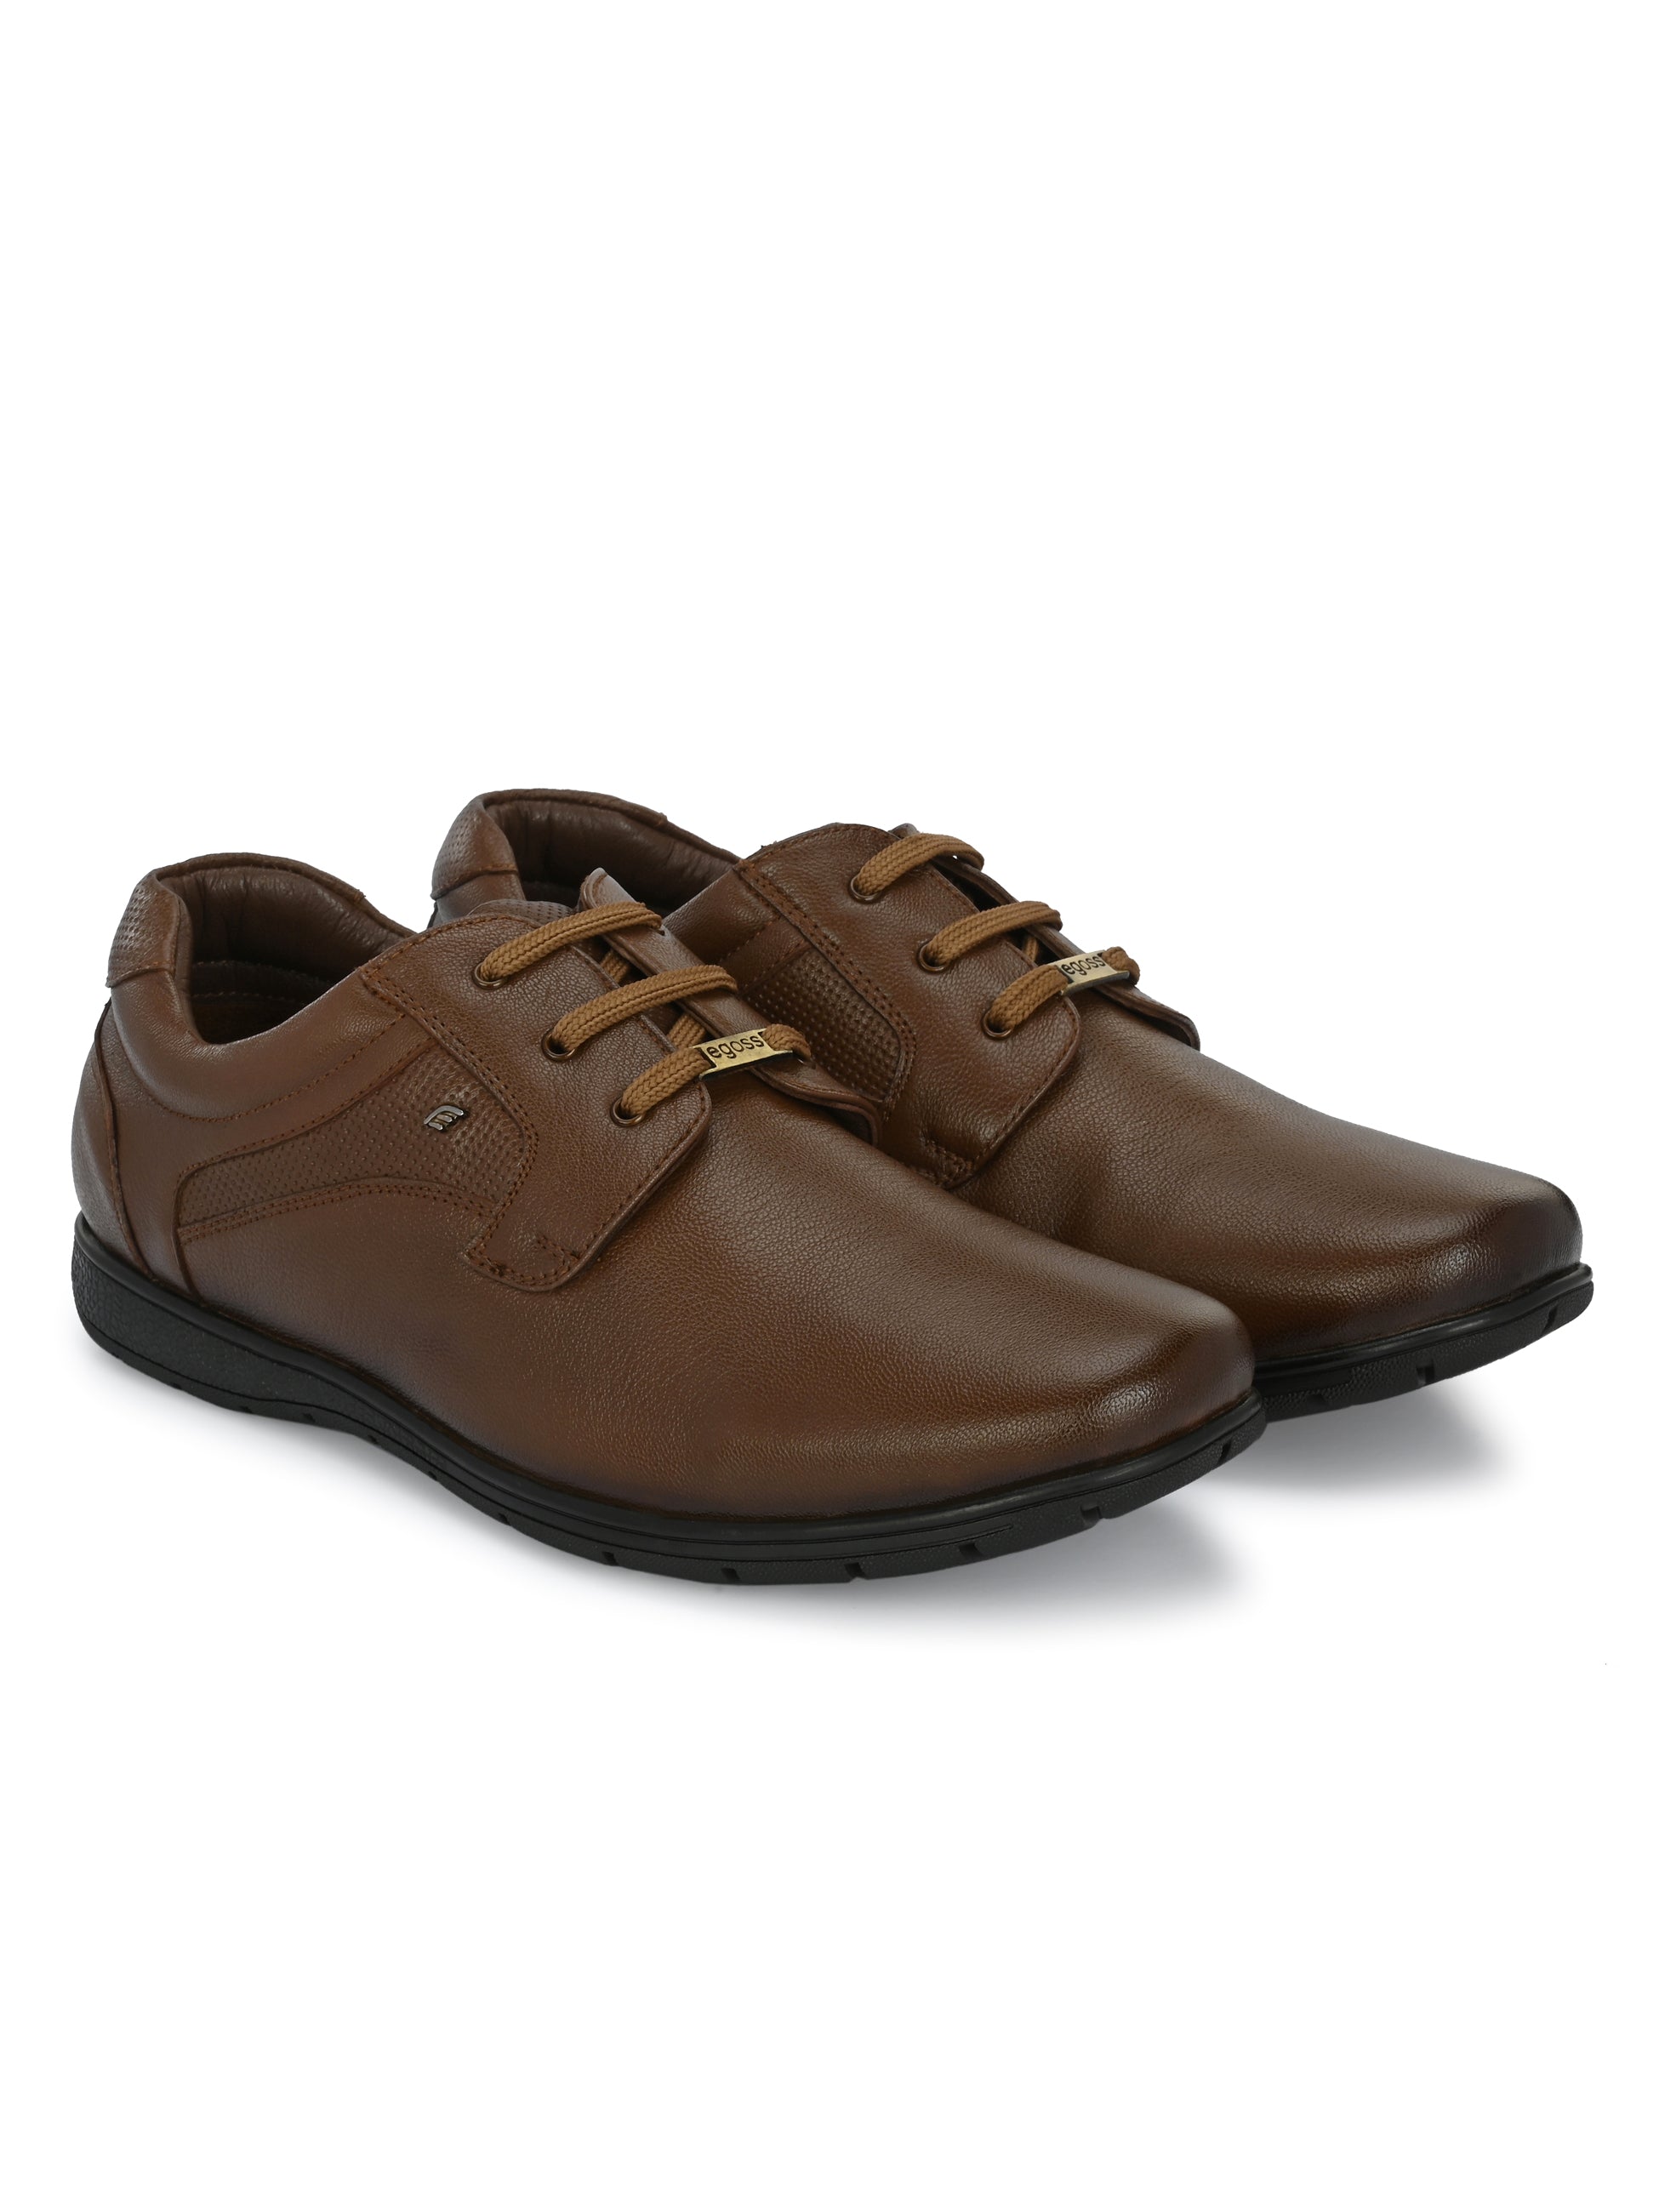 Egoss Casual Lace-Up Shoes For Men